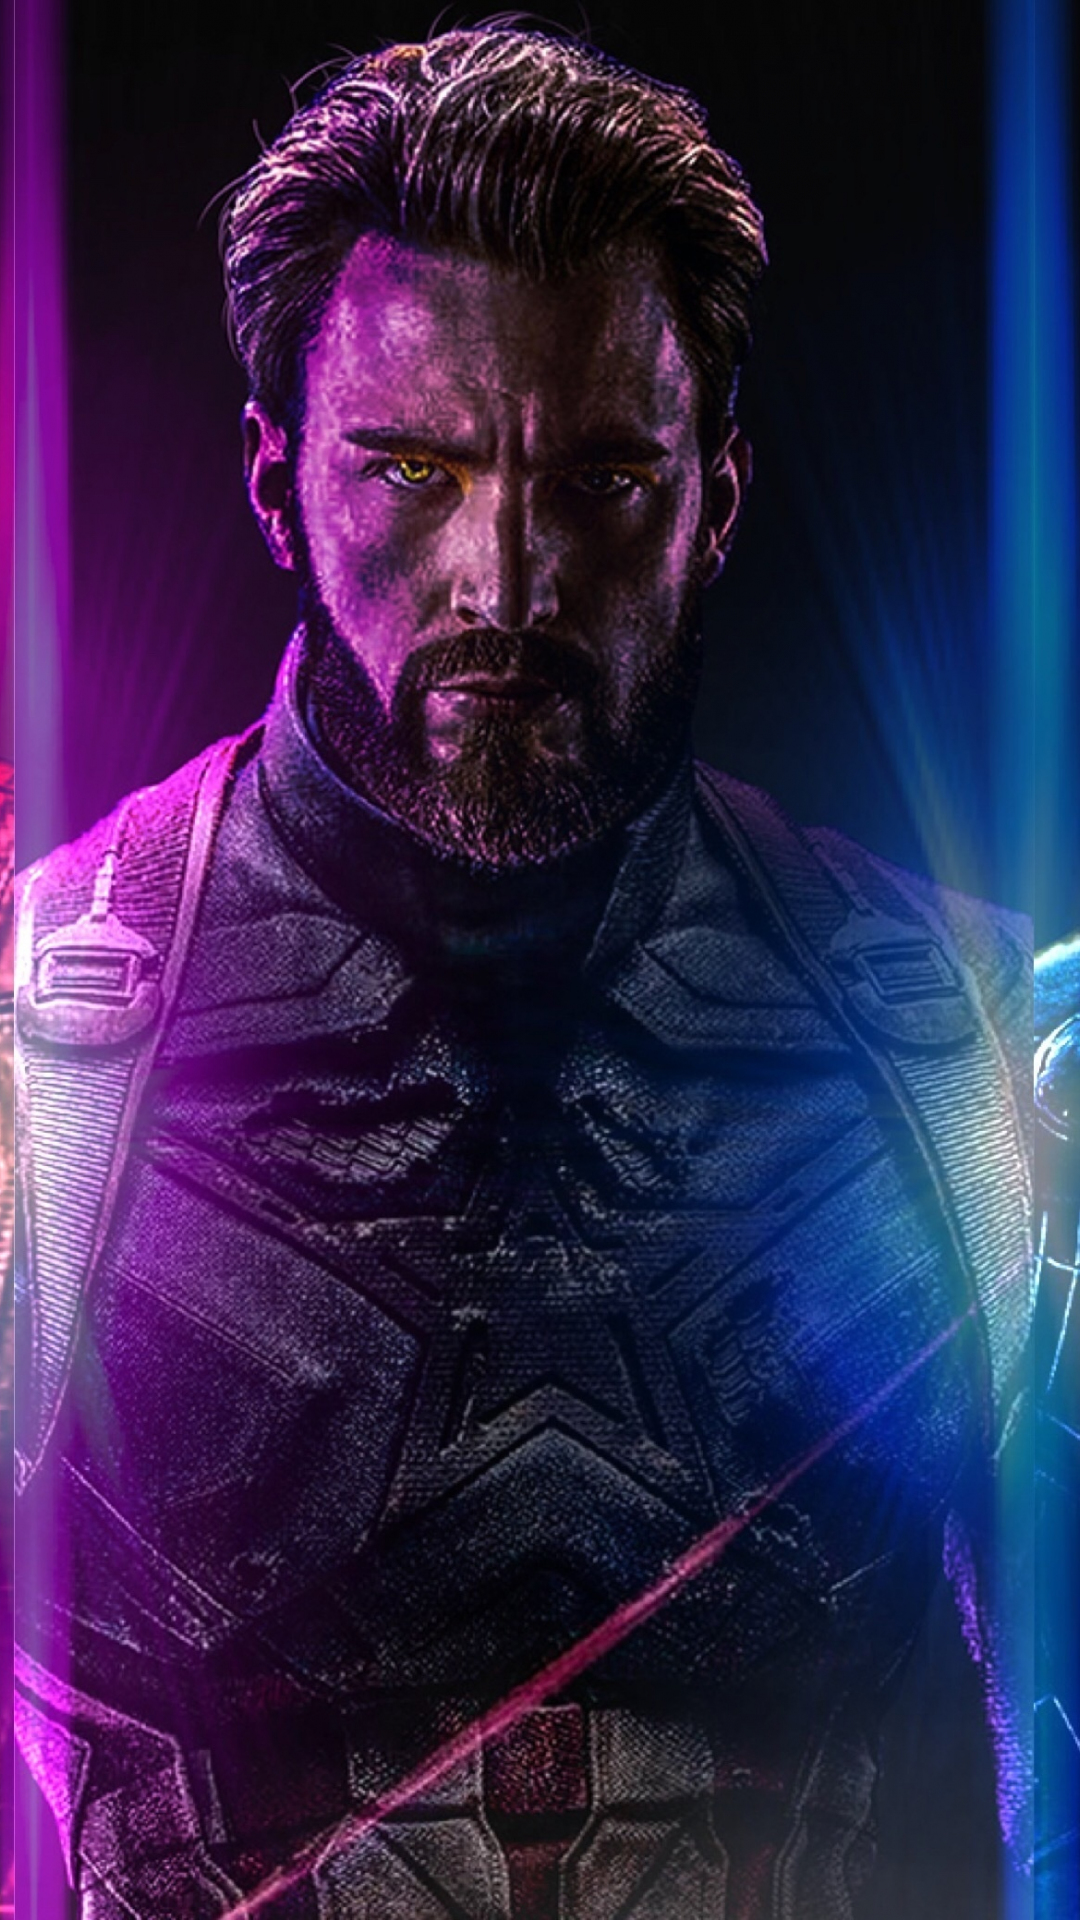 Download wallpaper 1080x1920 avengers: infinity war, star-lord, captain  america, thor, 1080p wallpaper, samsung galaxy s4, s5, note, sony xperia z,  z1, z2, z3, htc one, lenovo vibe, google pixel 2, oneplus 5,